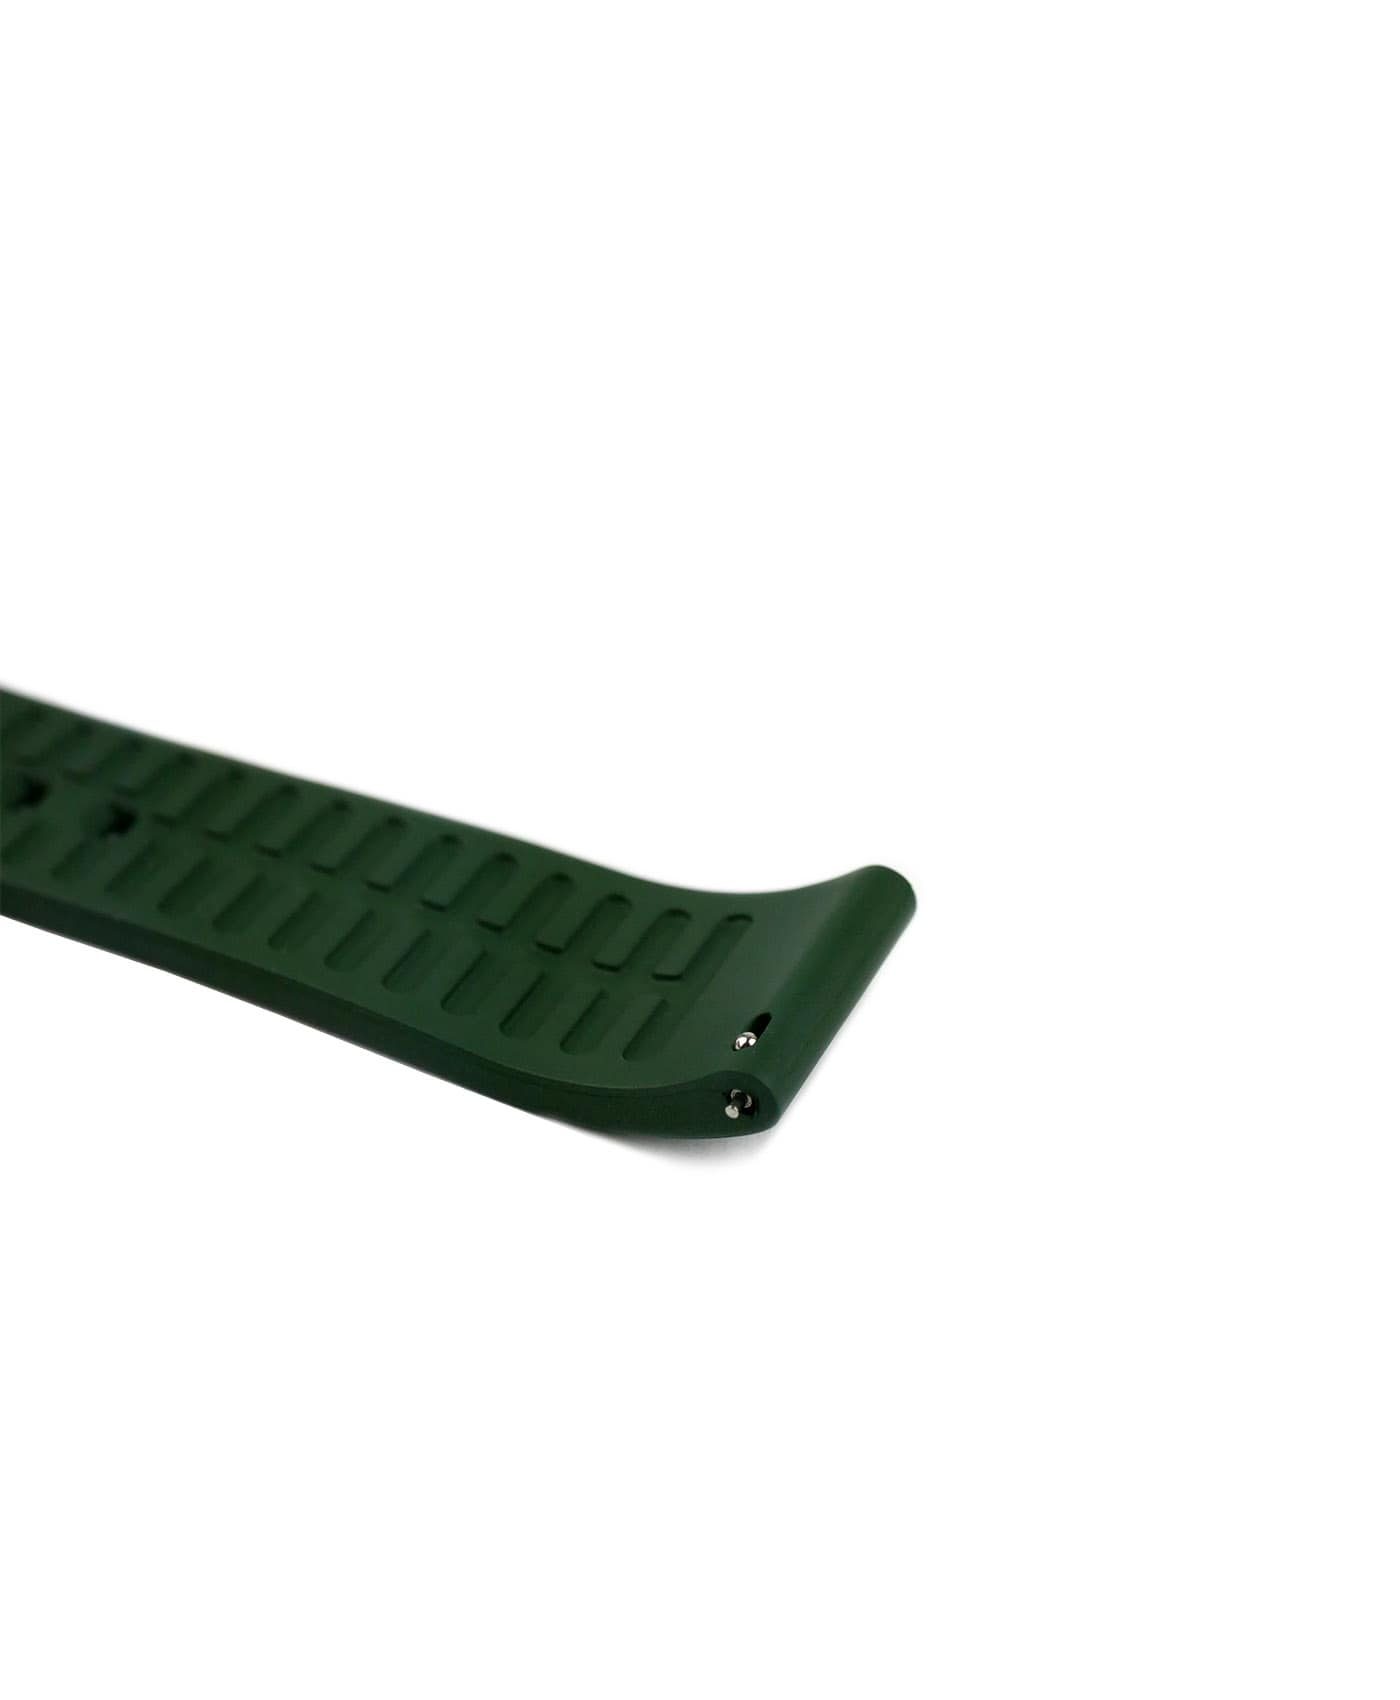 Classic plain Rubber watch strap_Green_side curved